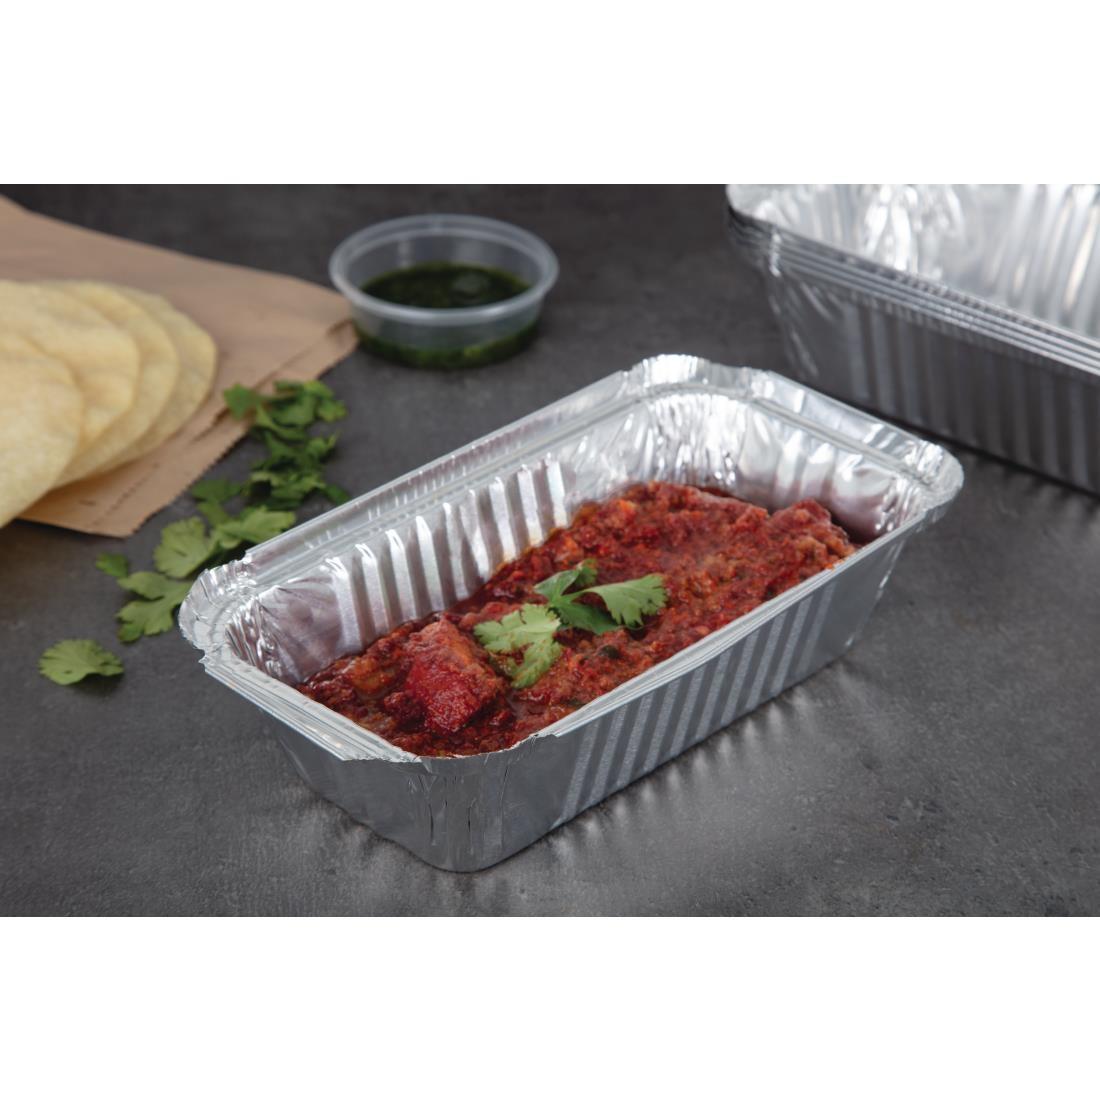 Fiesta Recyclable Foil Containers Large 688ml / 24oz (Pack of 500) - CD951  - 7